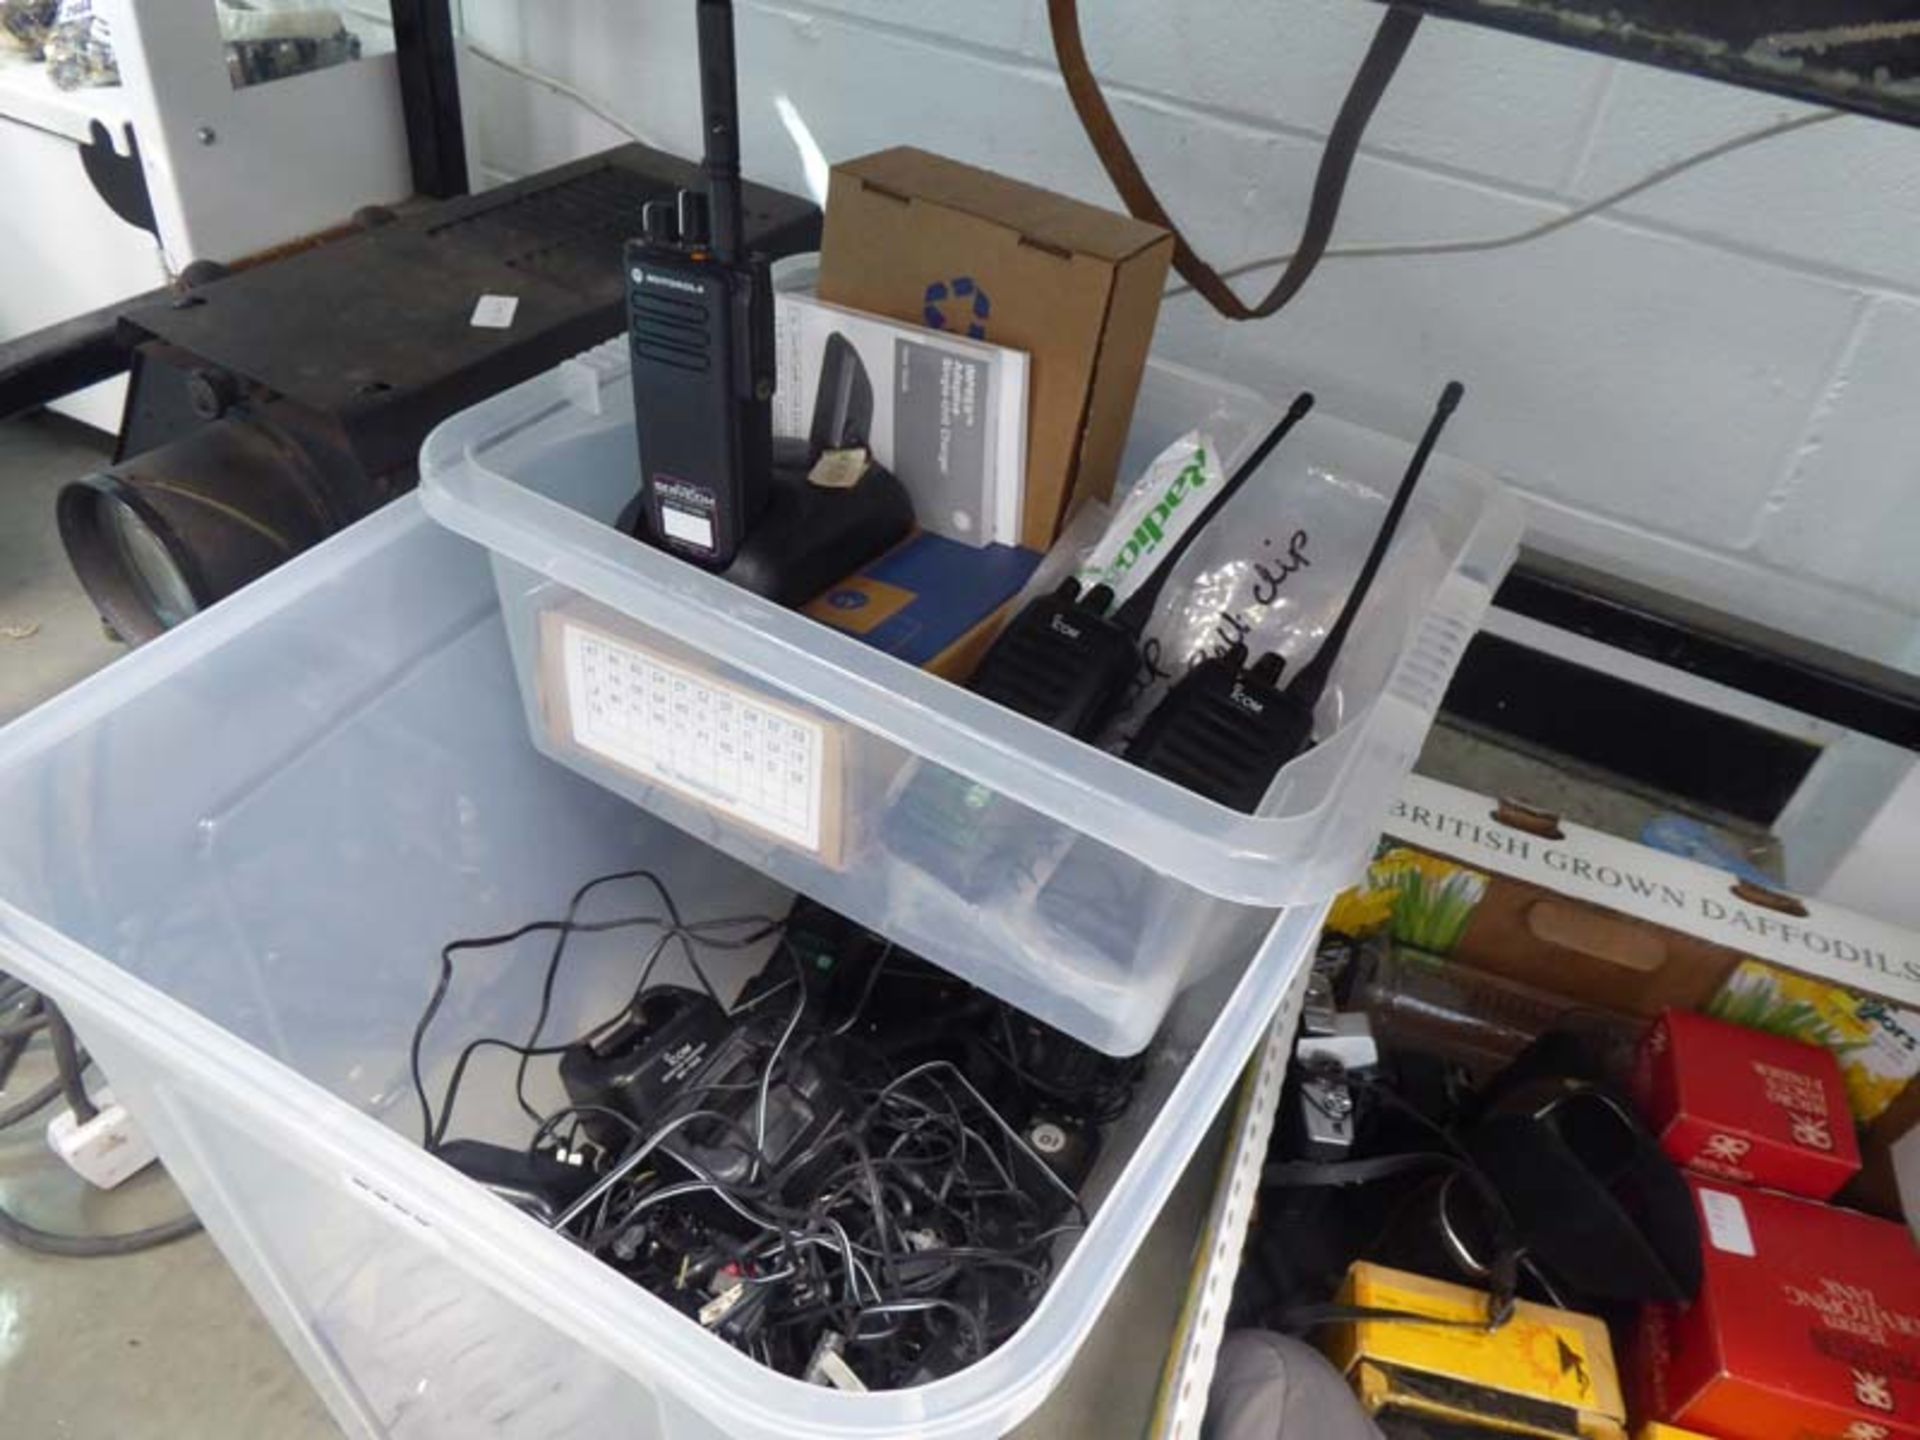 Large crate containing qty of Ikon and Motorola radio handset equipment, chargers, docks,